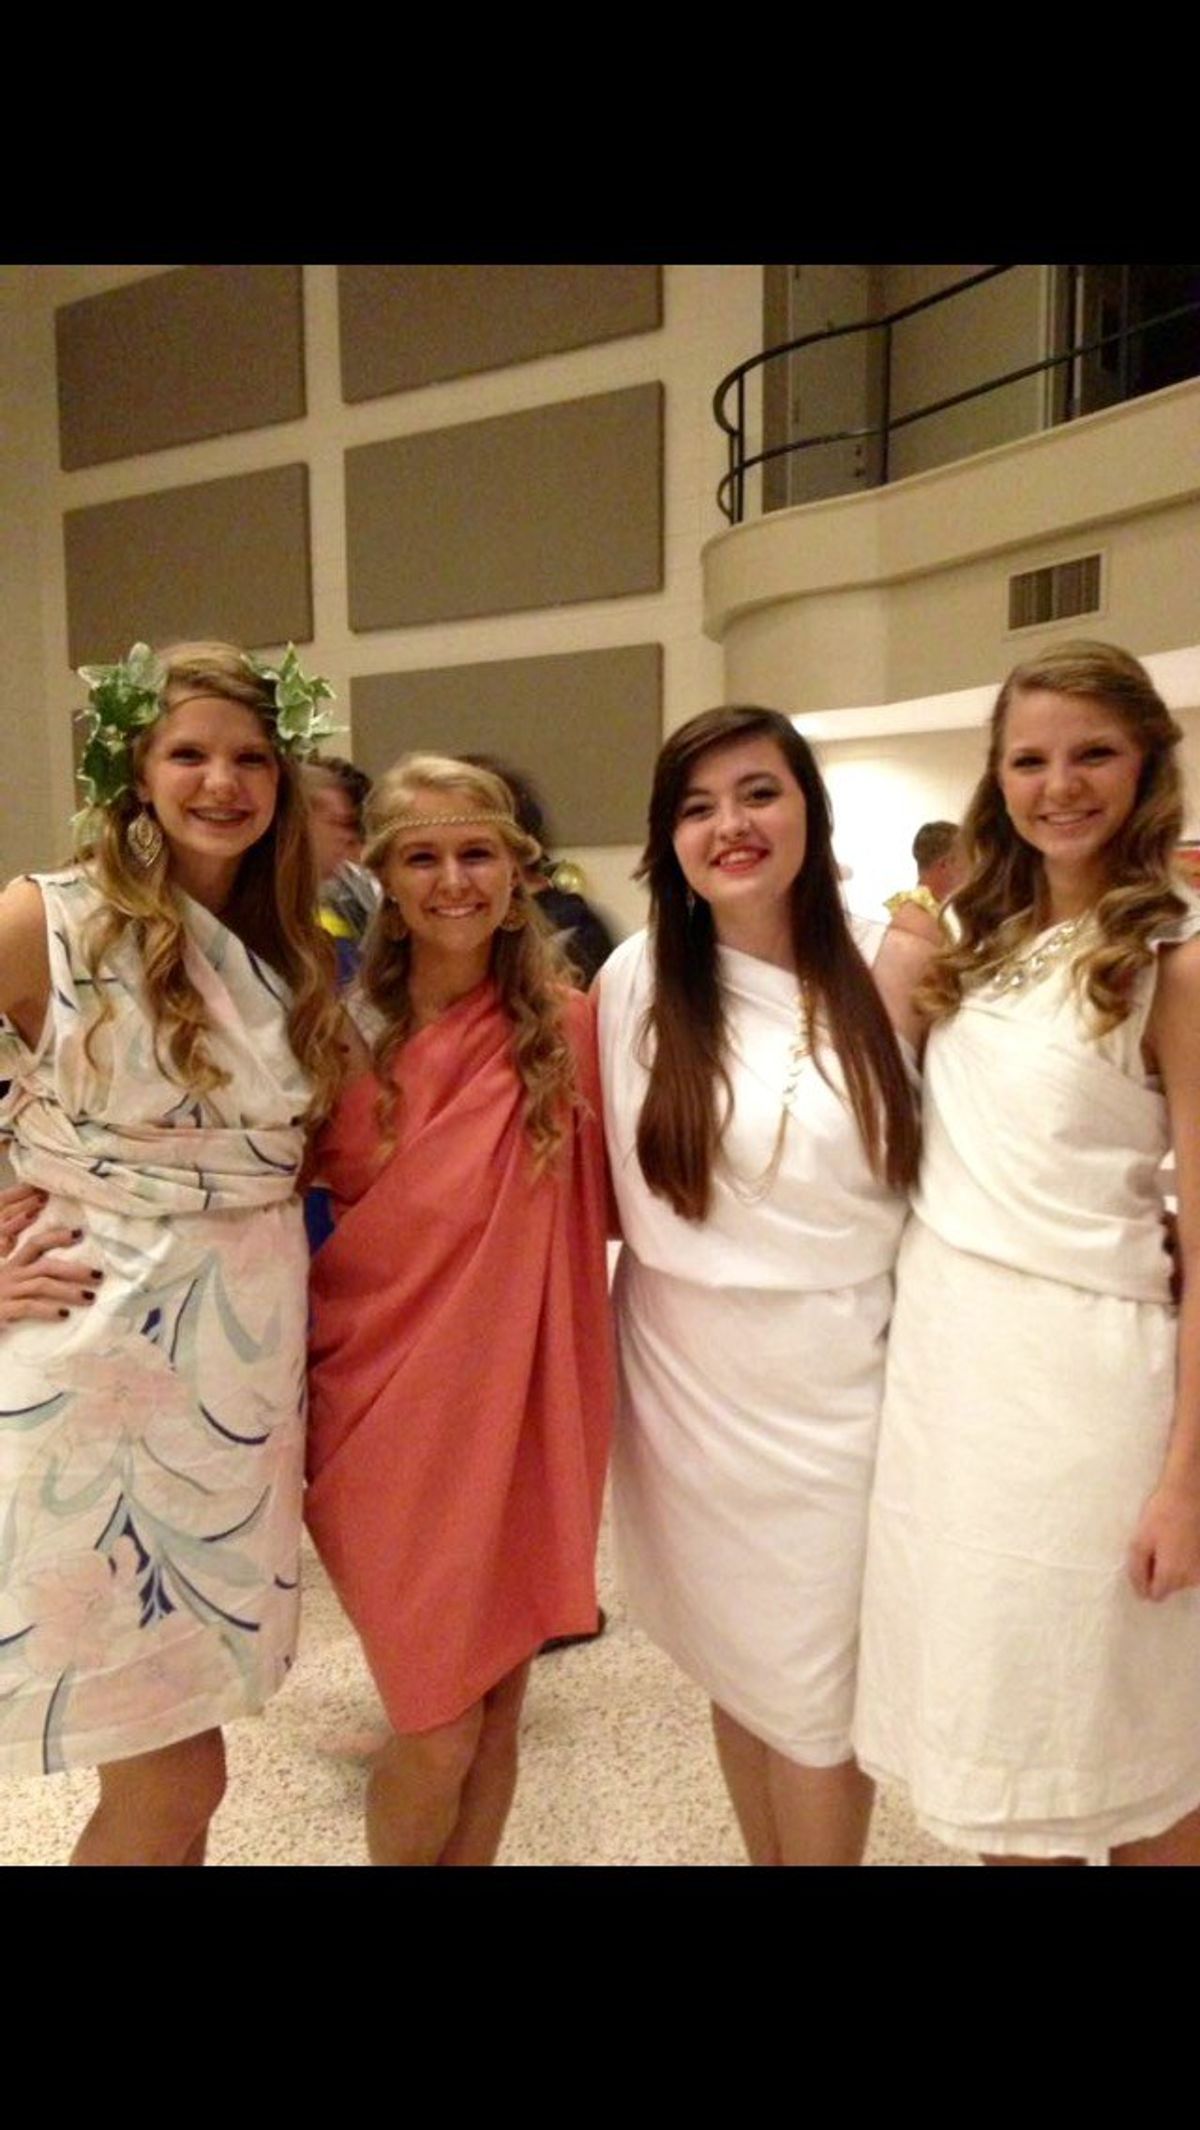 The Faulkner Chronicles: Planting Trees, Wearing Togas And Having Good Times